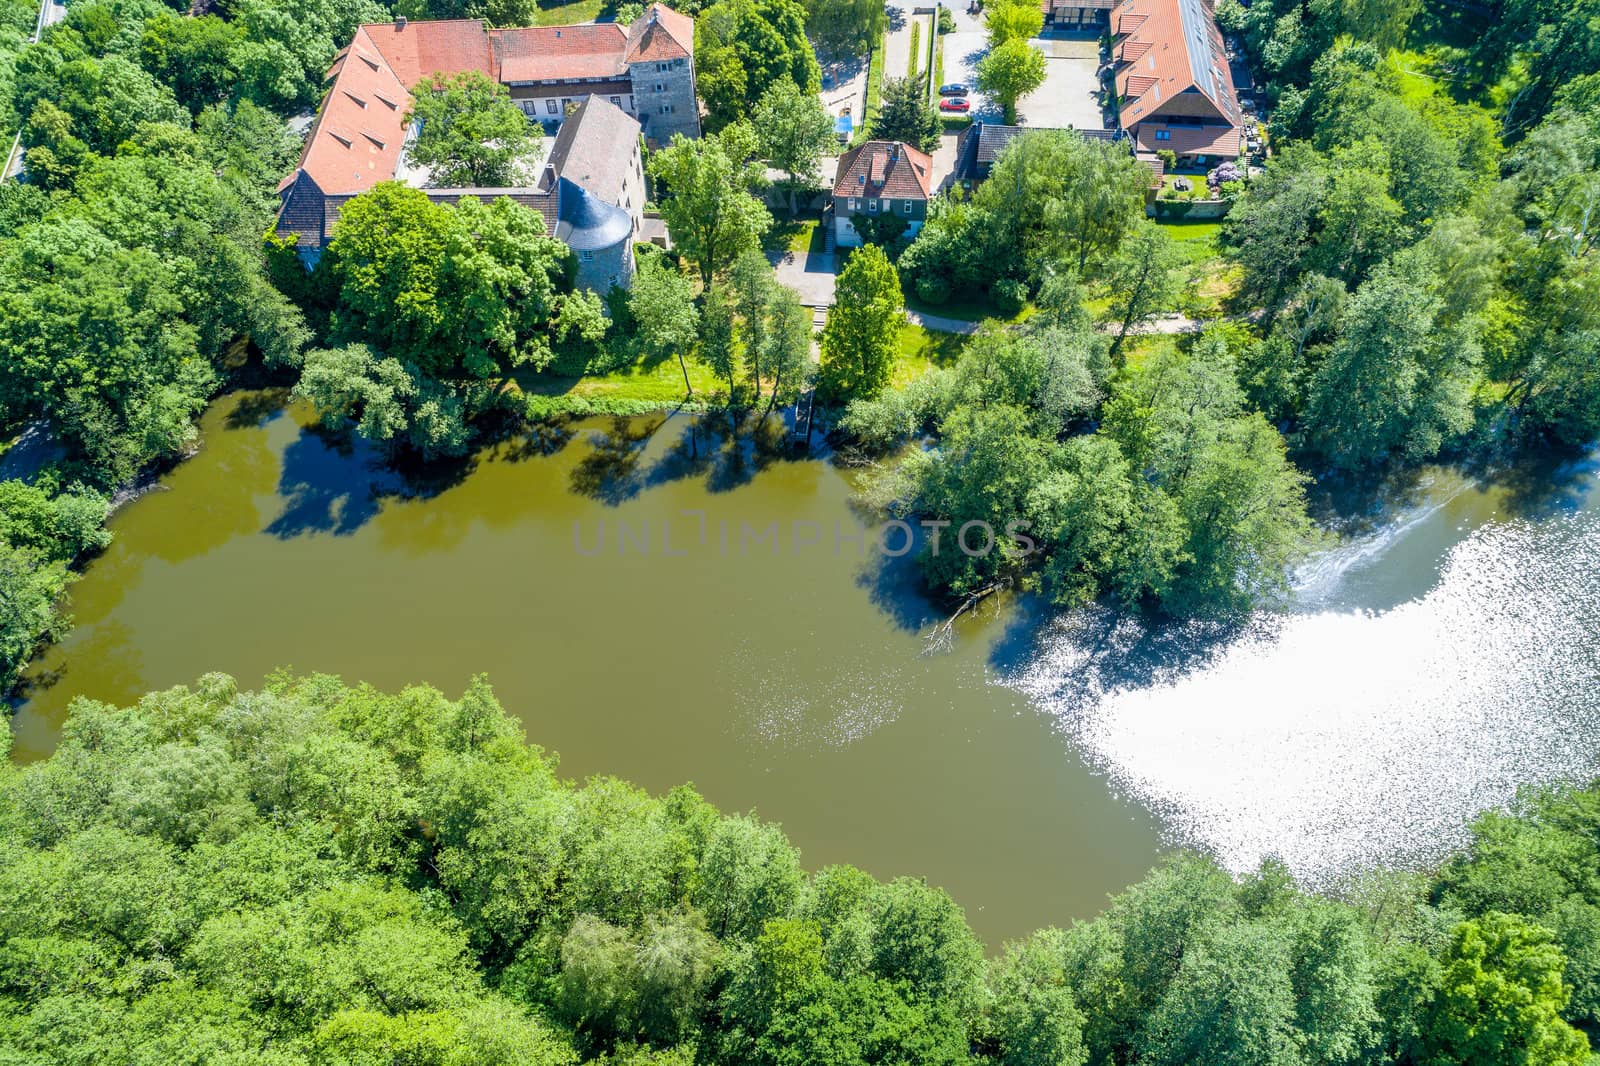 The pond at the moated castle Neuhaus from the air, with bushes and trees, at the edge of the village by geogif